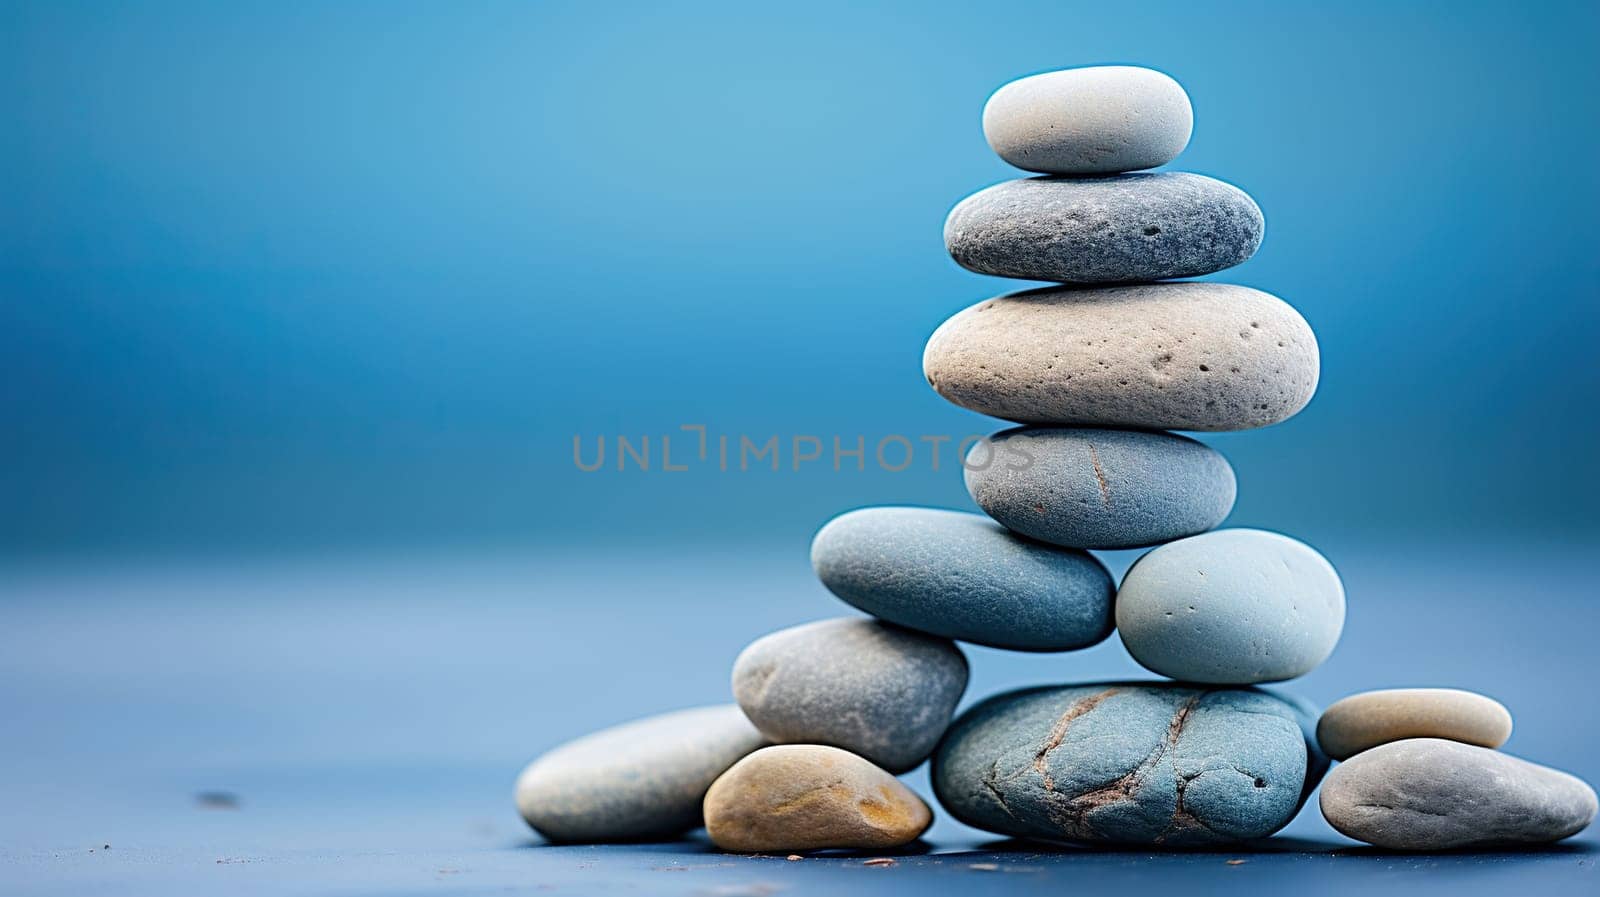 A stack of ugly smooth stones on a blue background.